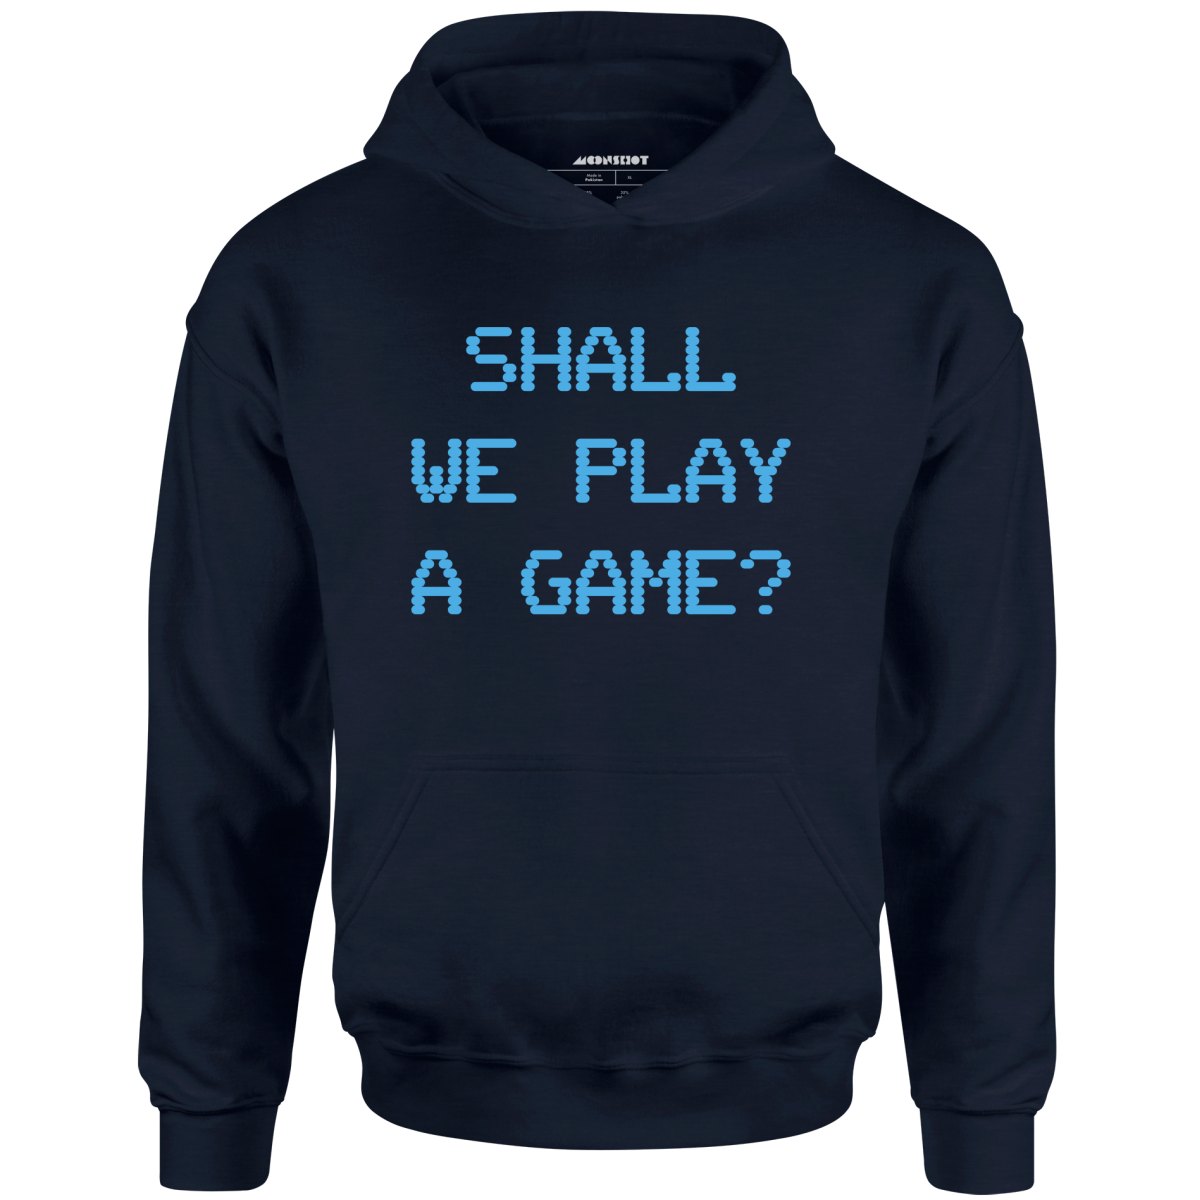 Shall We Play a Game? - Unisex Hoodie